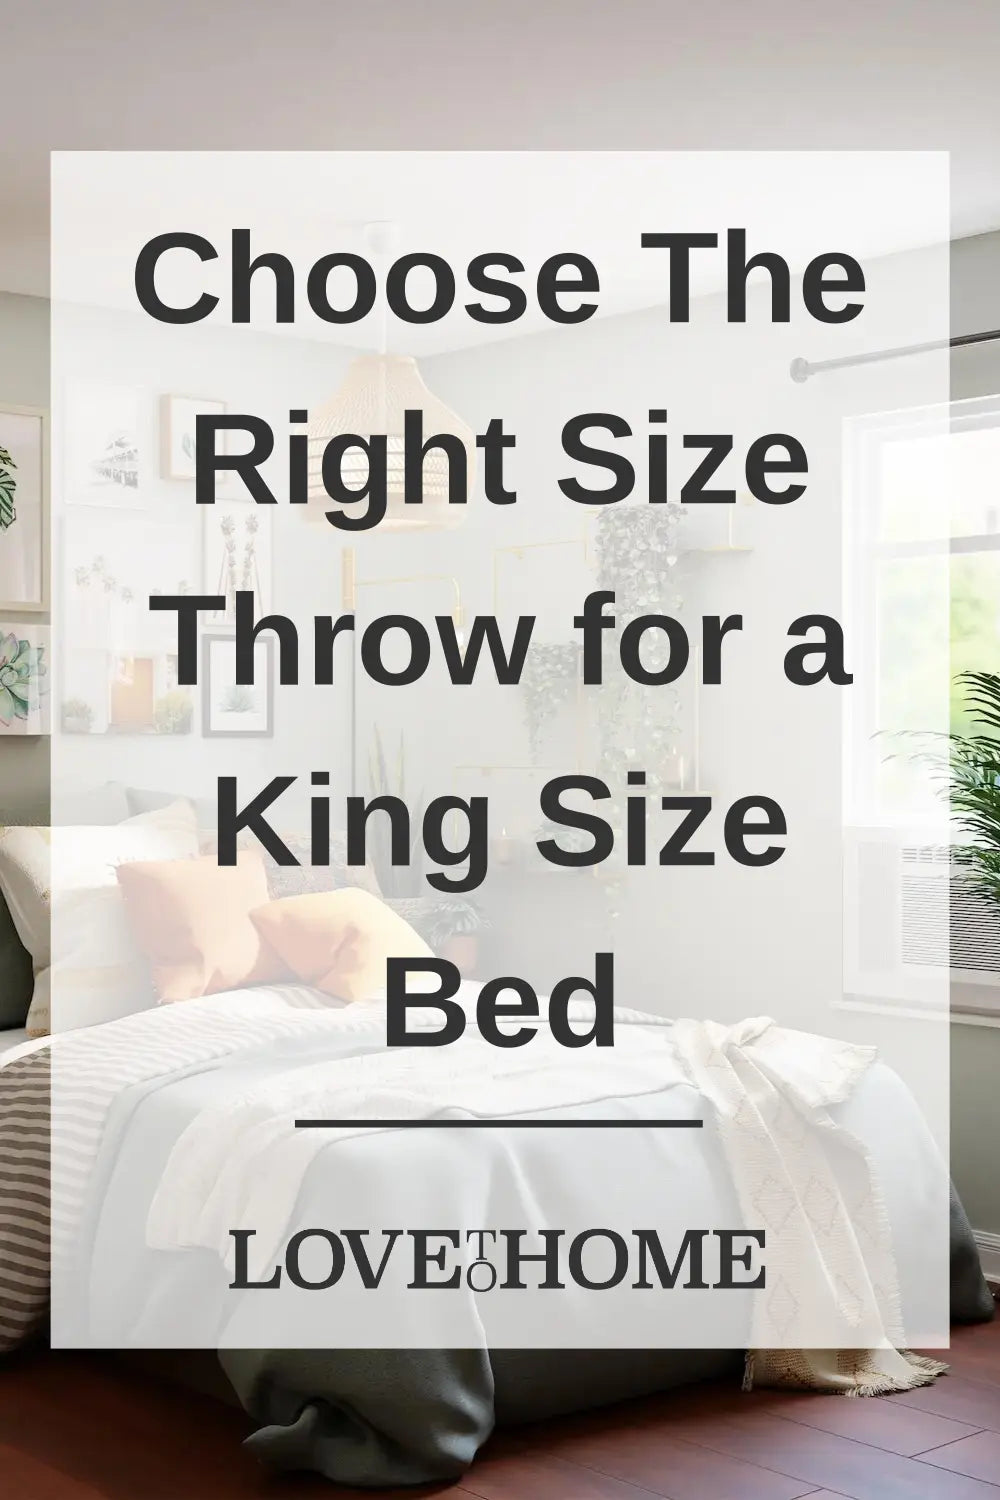 Choose The Right Size Throw for a King Size Bed